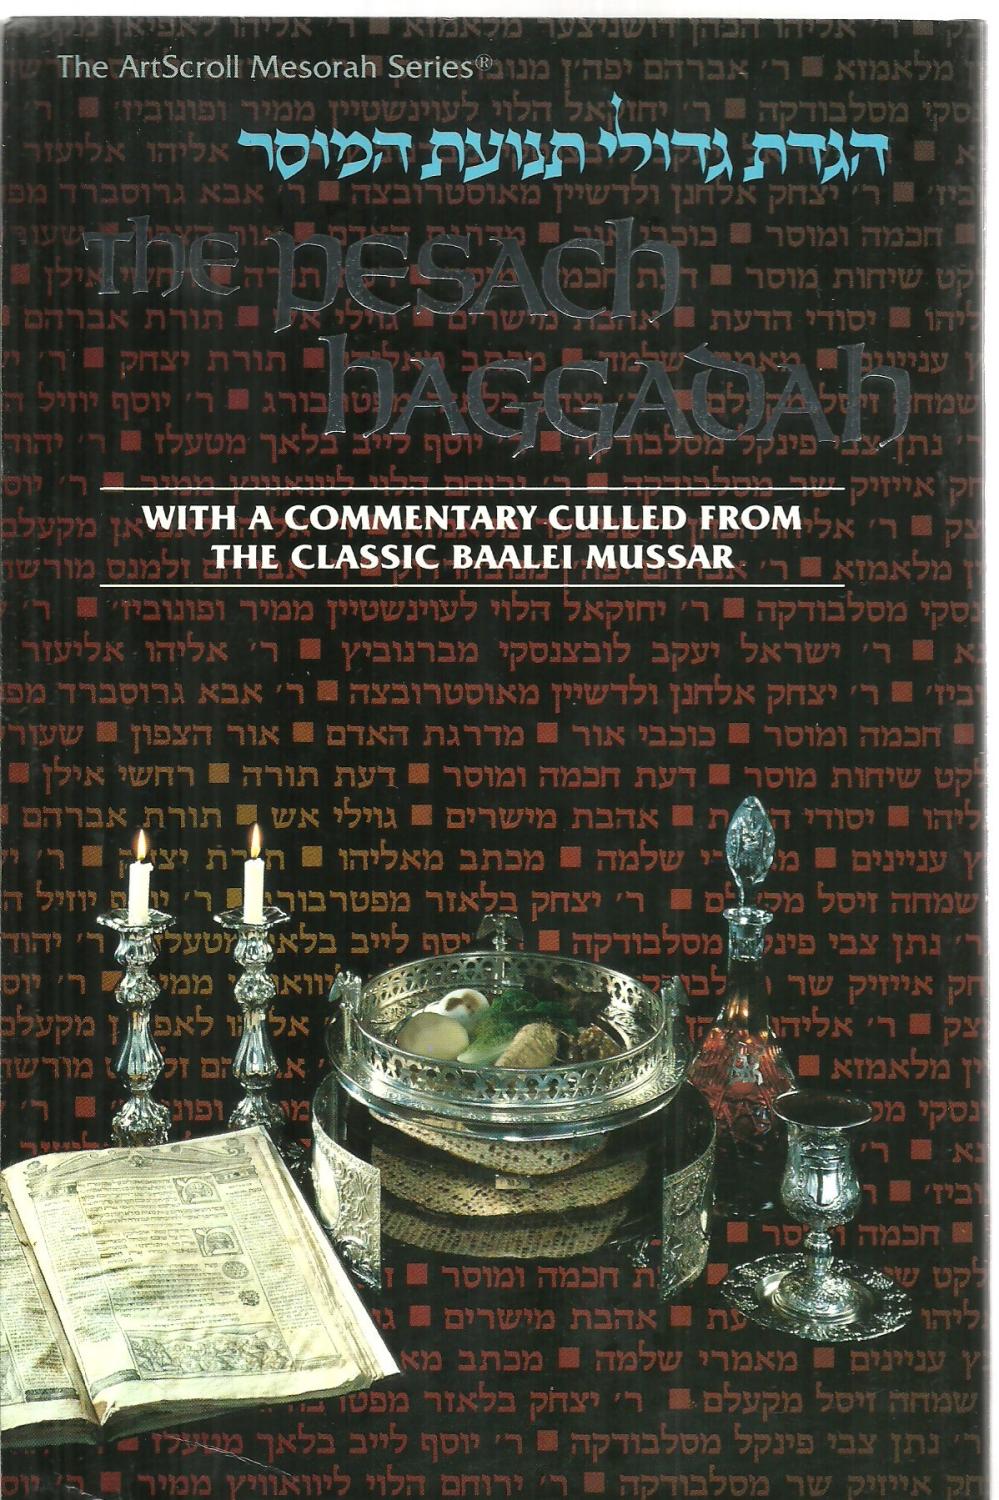 The Pesach Haggadah, With a commentary culled from the classic Baalei Mussar - Rabbi Shalom Meir Wallach